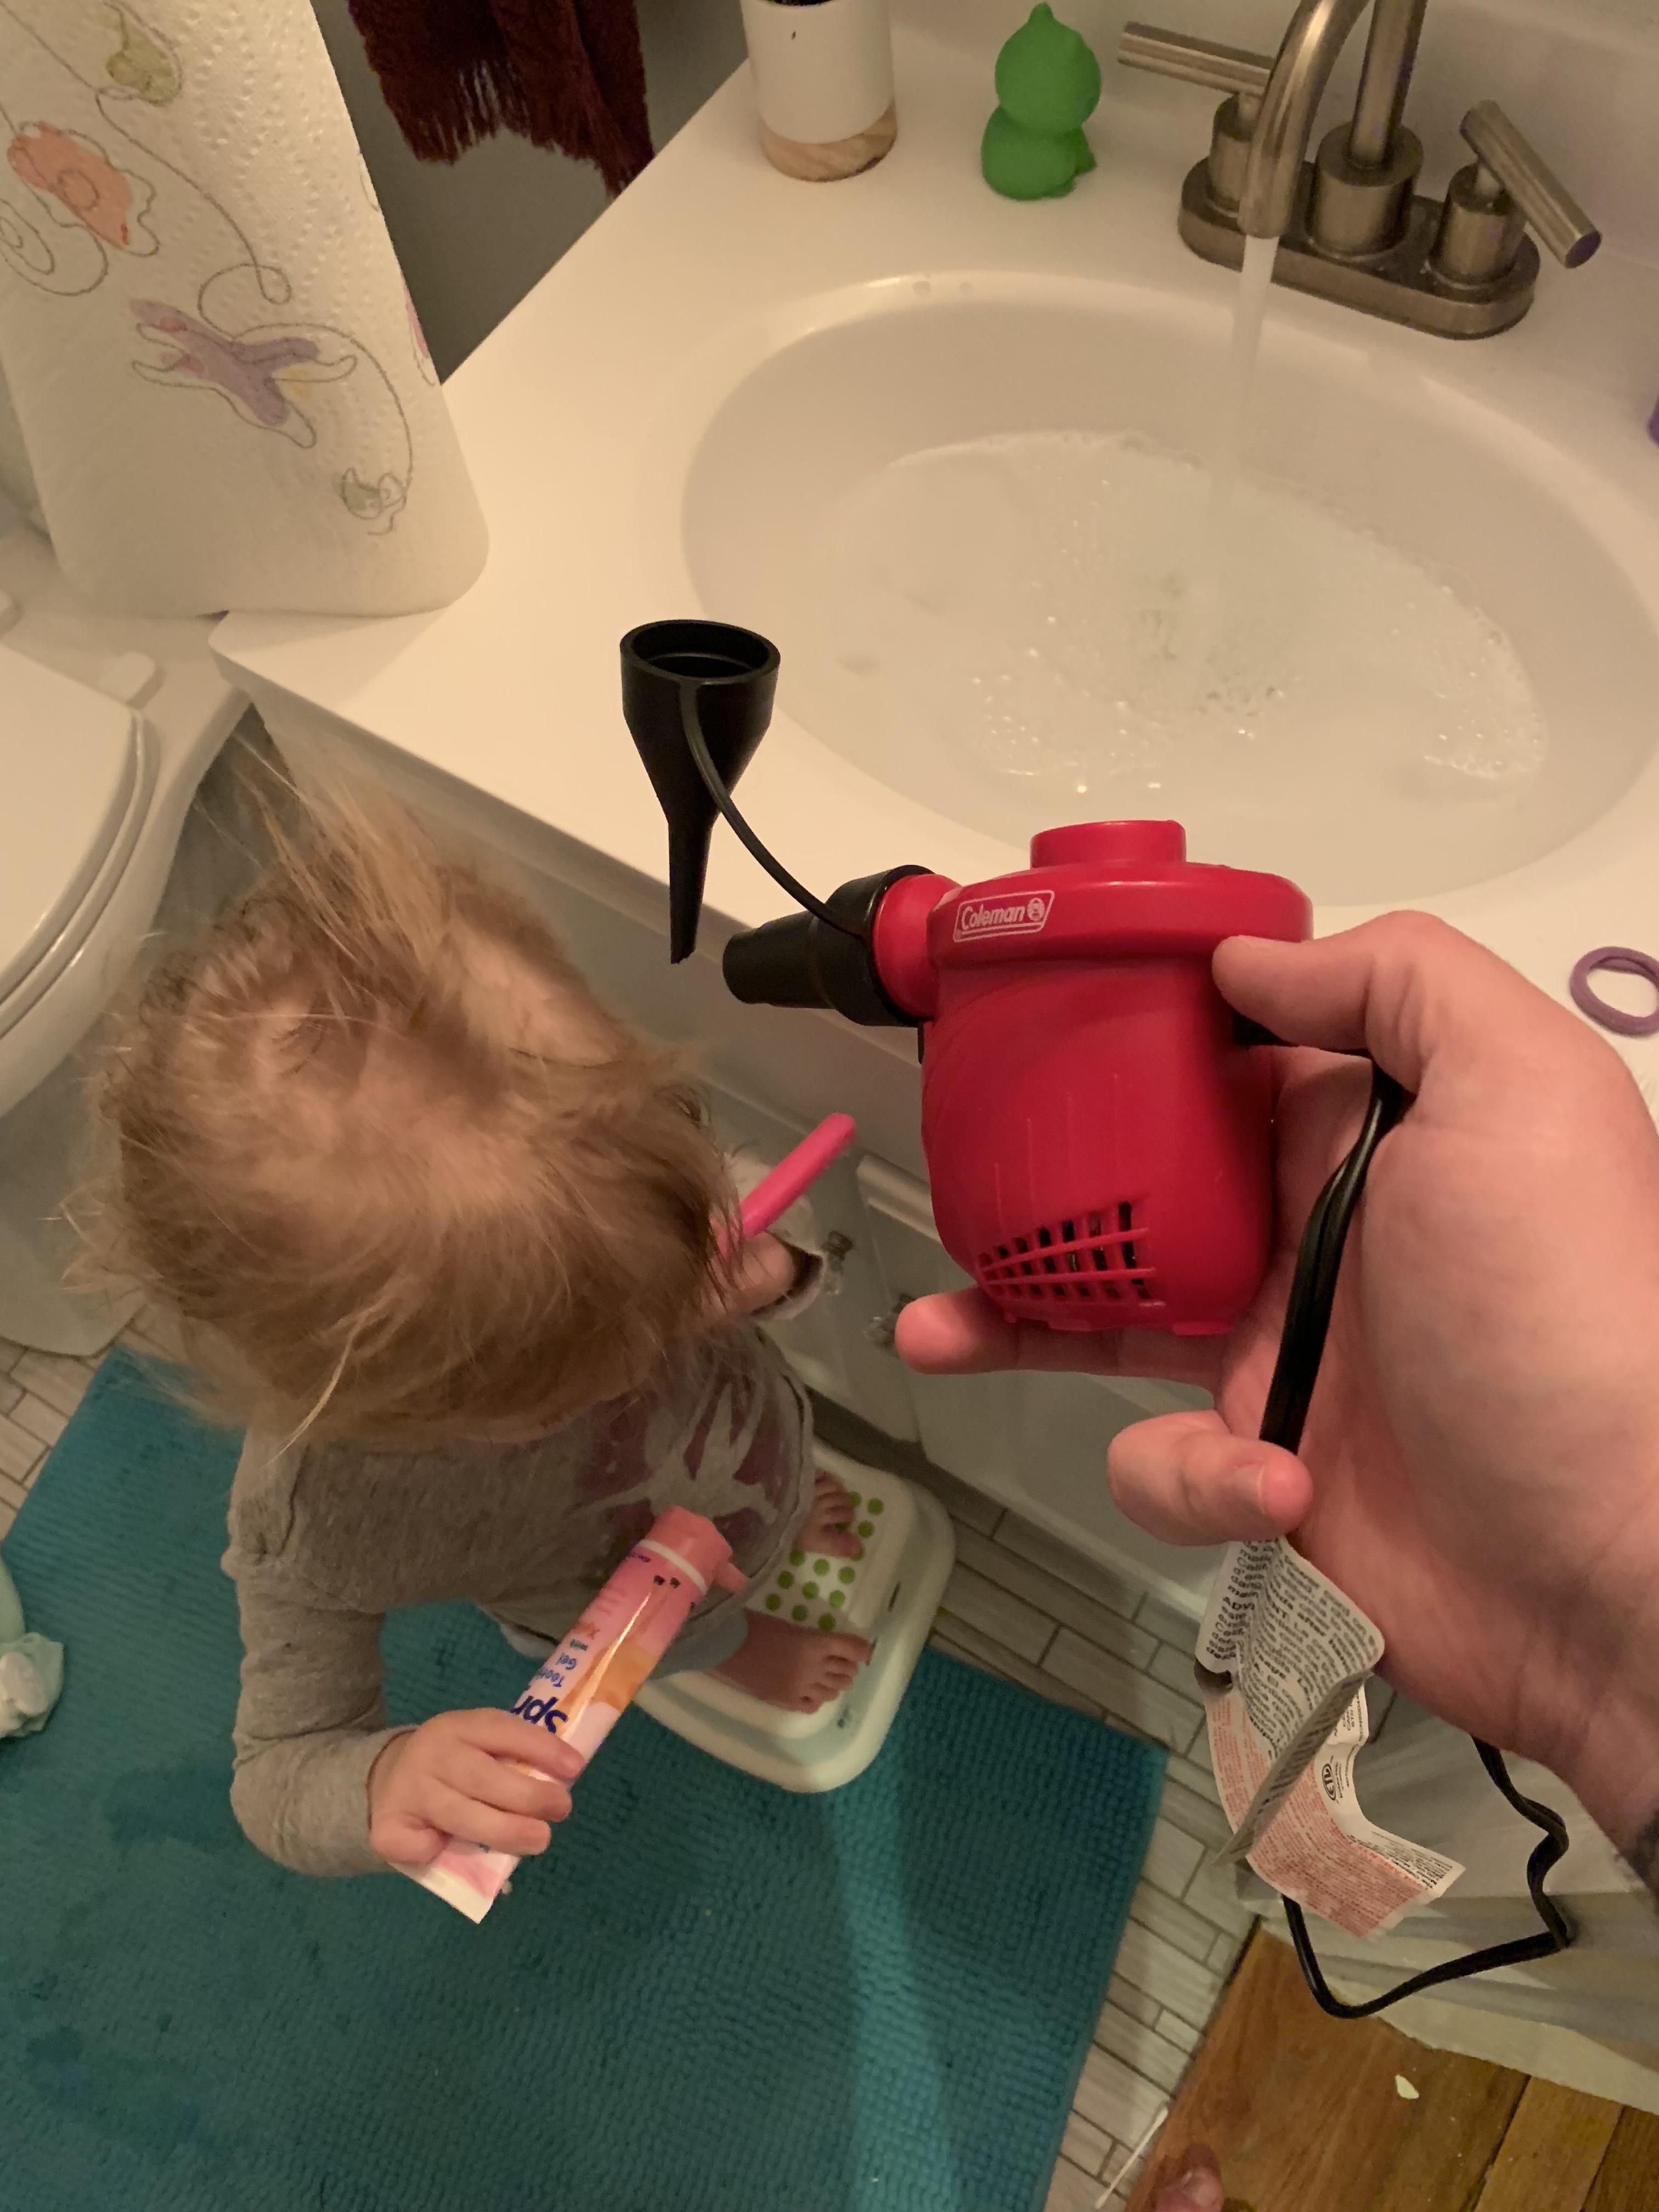 Wife’s out of town and took the hair dryer, so I had to improvise. Officially feel like a real dad now.